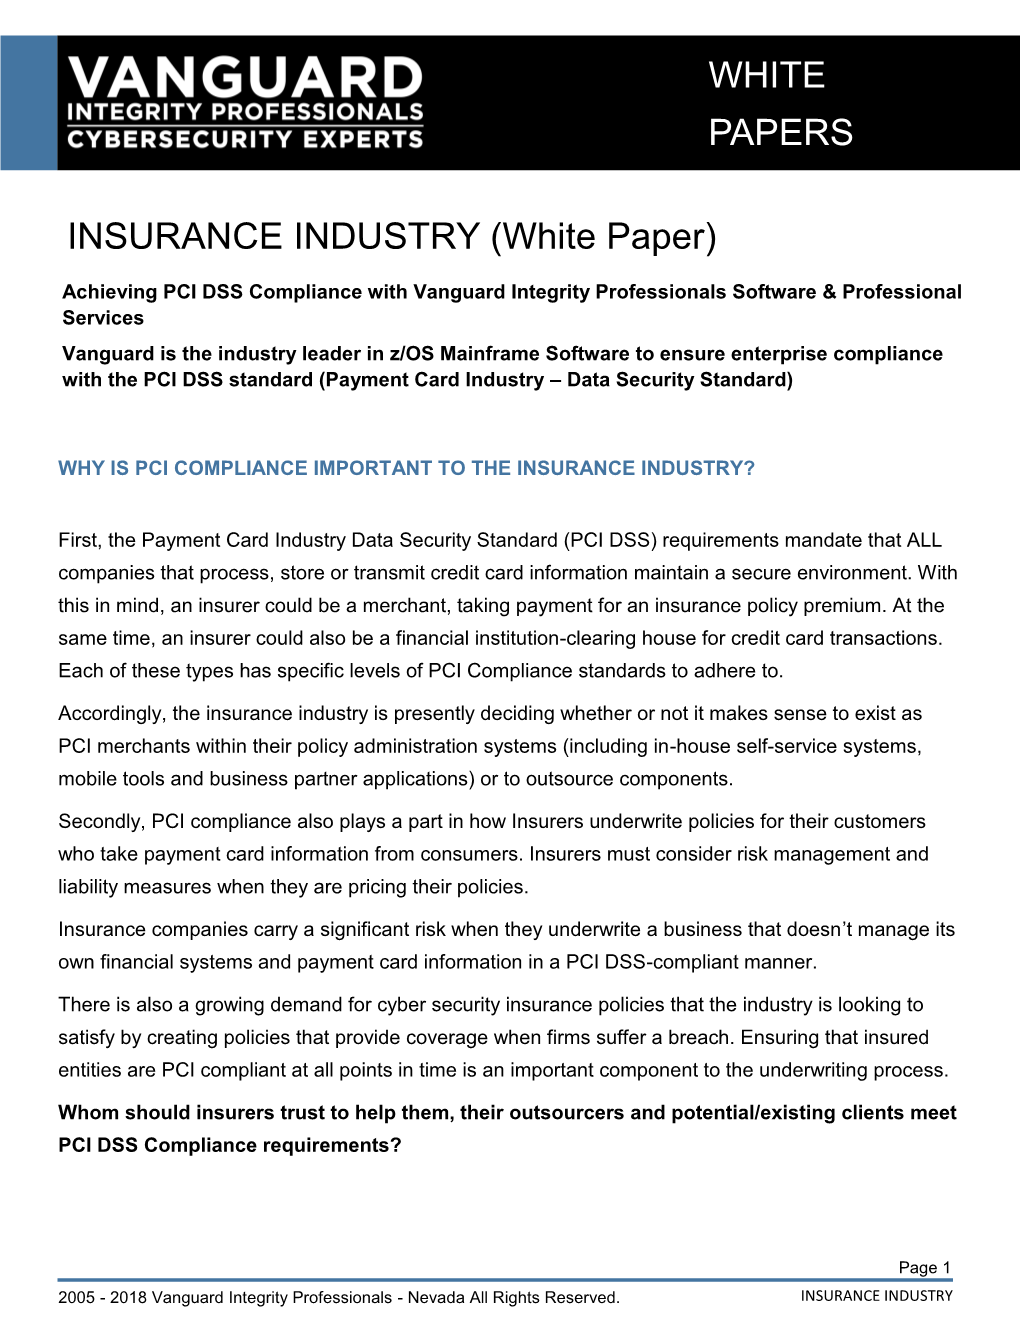 INSURANCE INDUSTRY (White Paper)